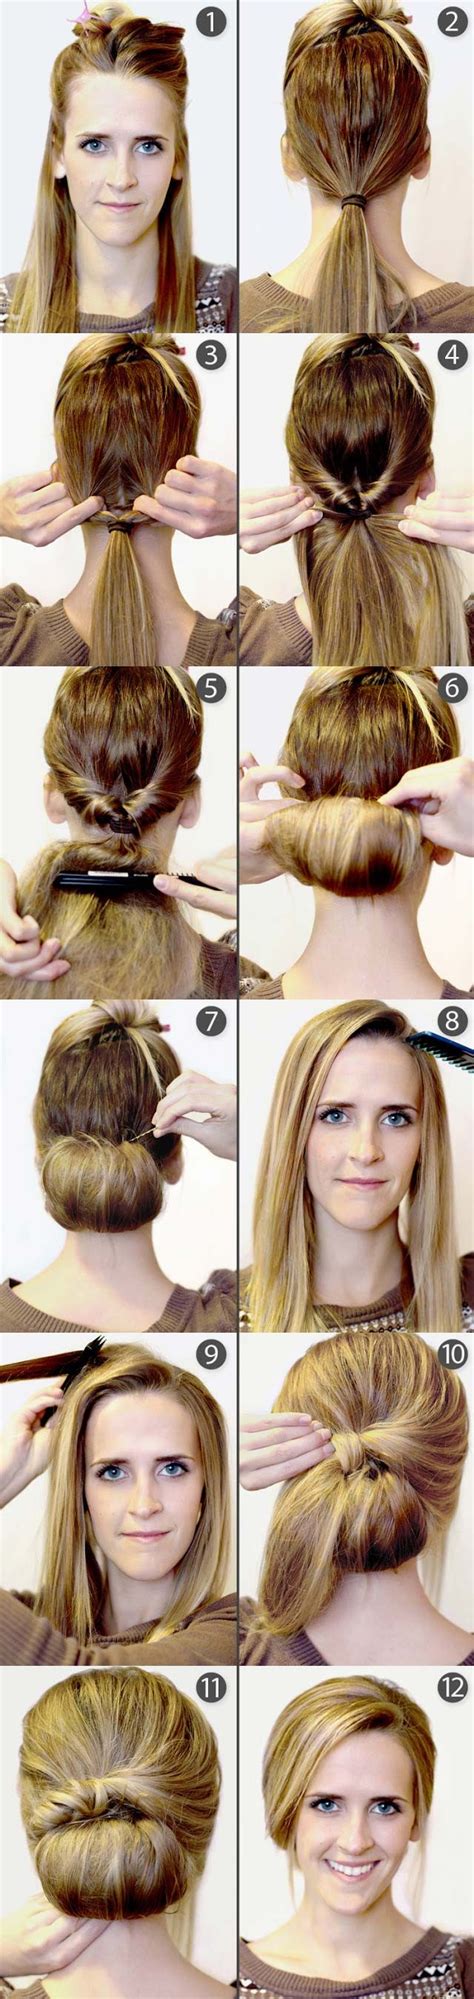 15 Cute Hairstyles Step By Step Hairstyles For Long Hair